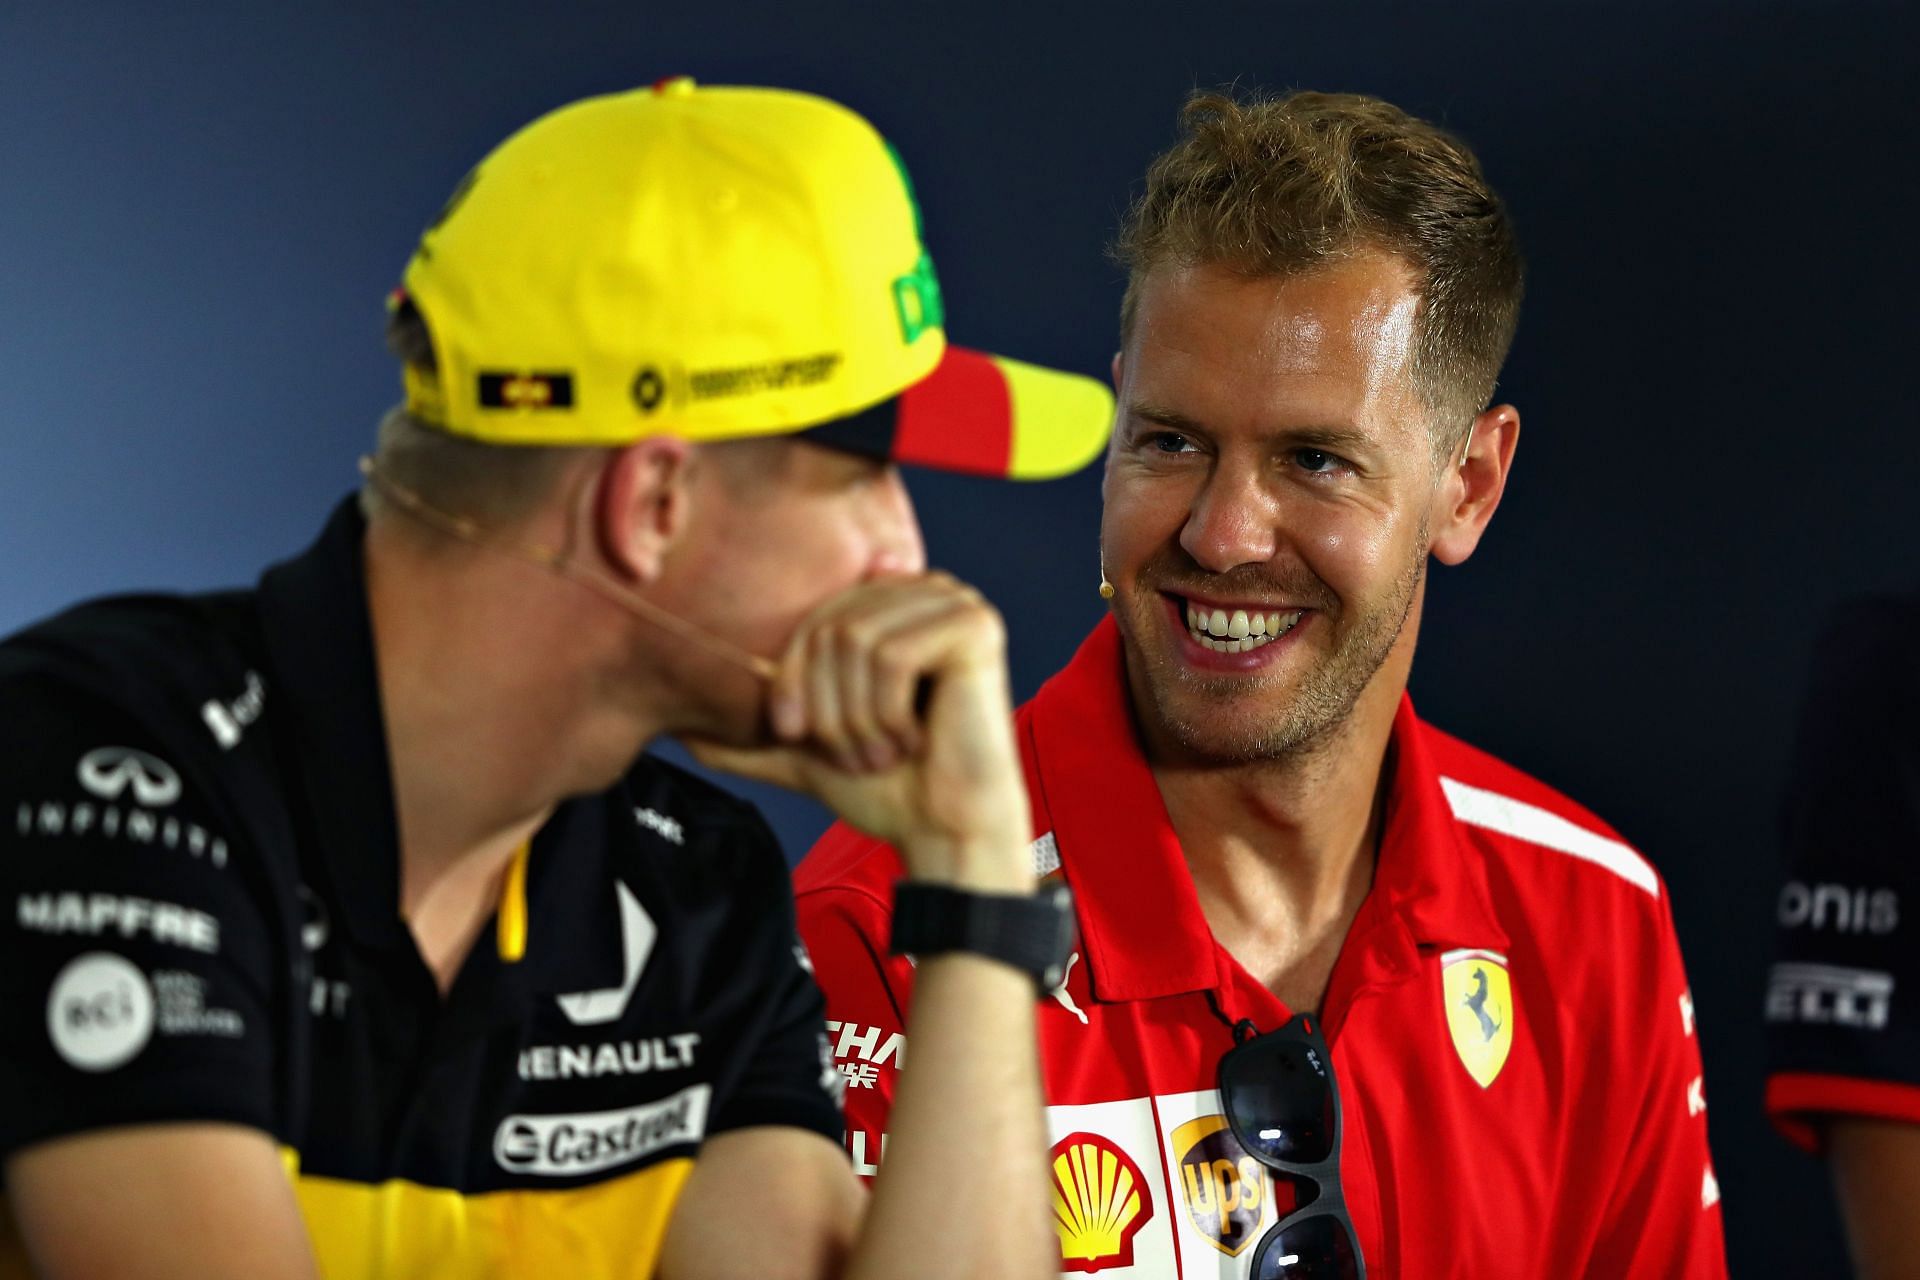 Sebastian Vettel with Nico Hulkenberg in the Drivers Press Conference during in Hockenheim, Germany. (Photo by Dan Istitene/Getty Images)